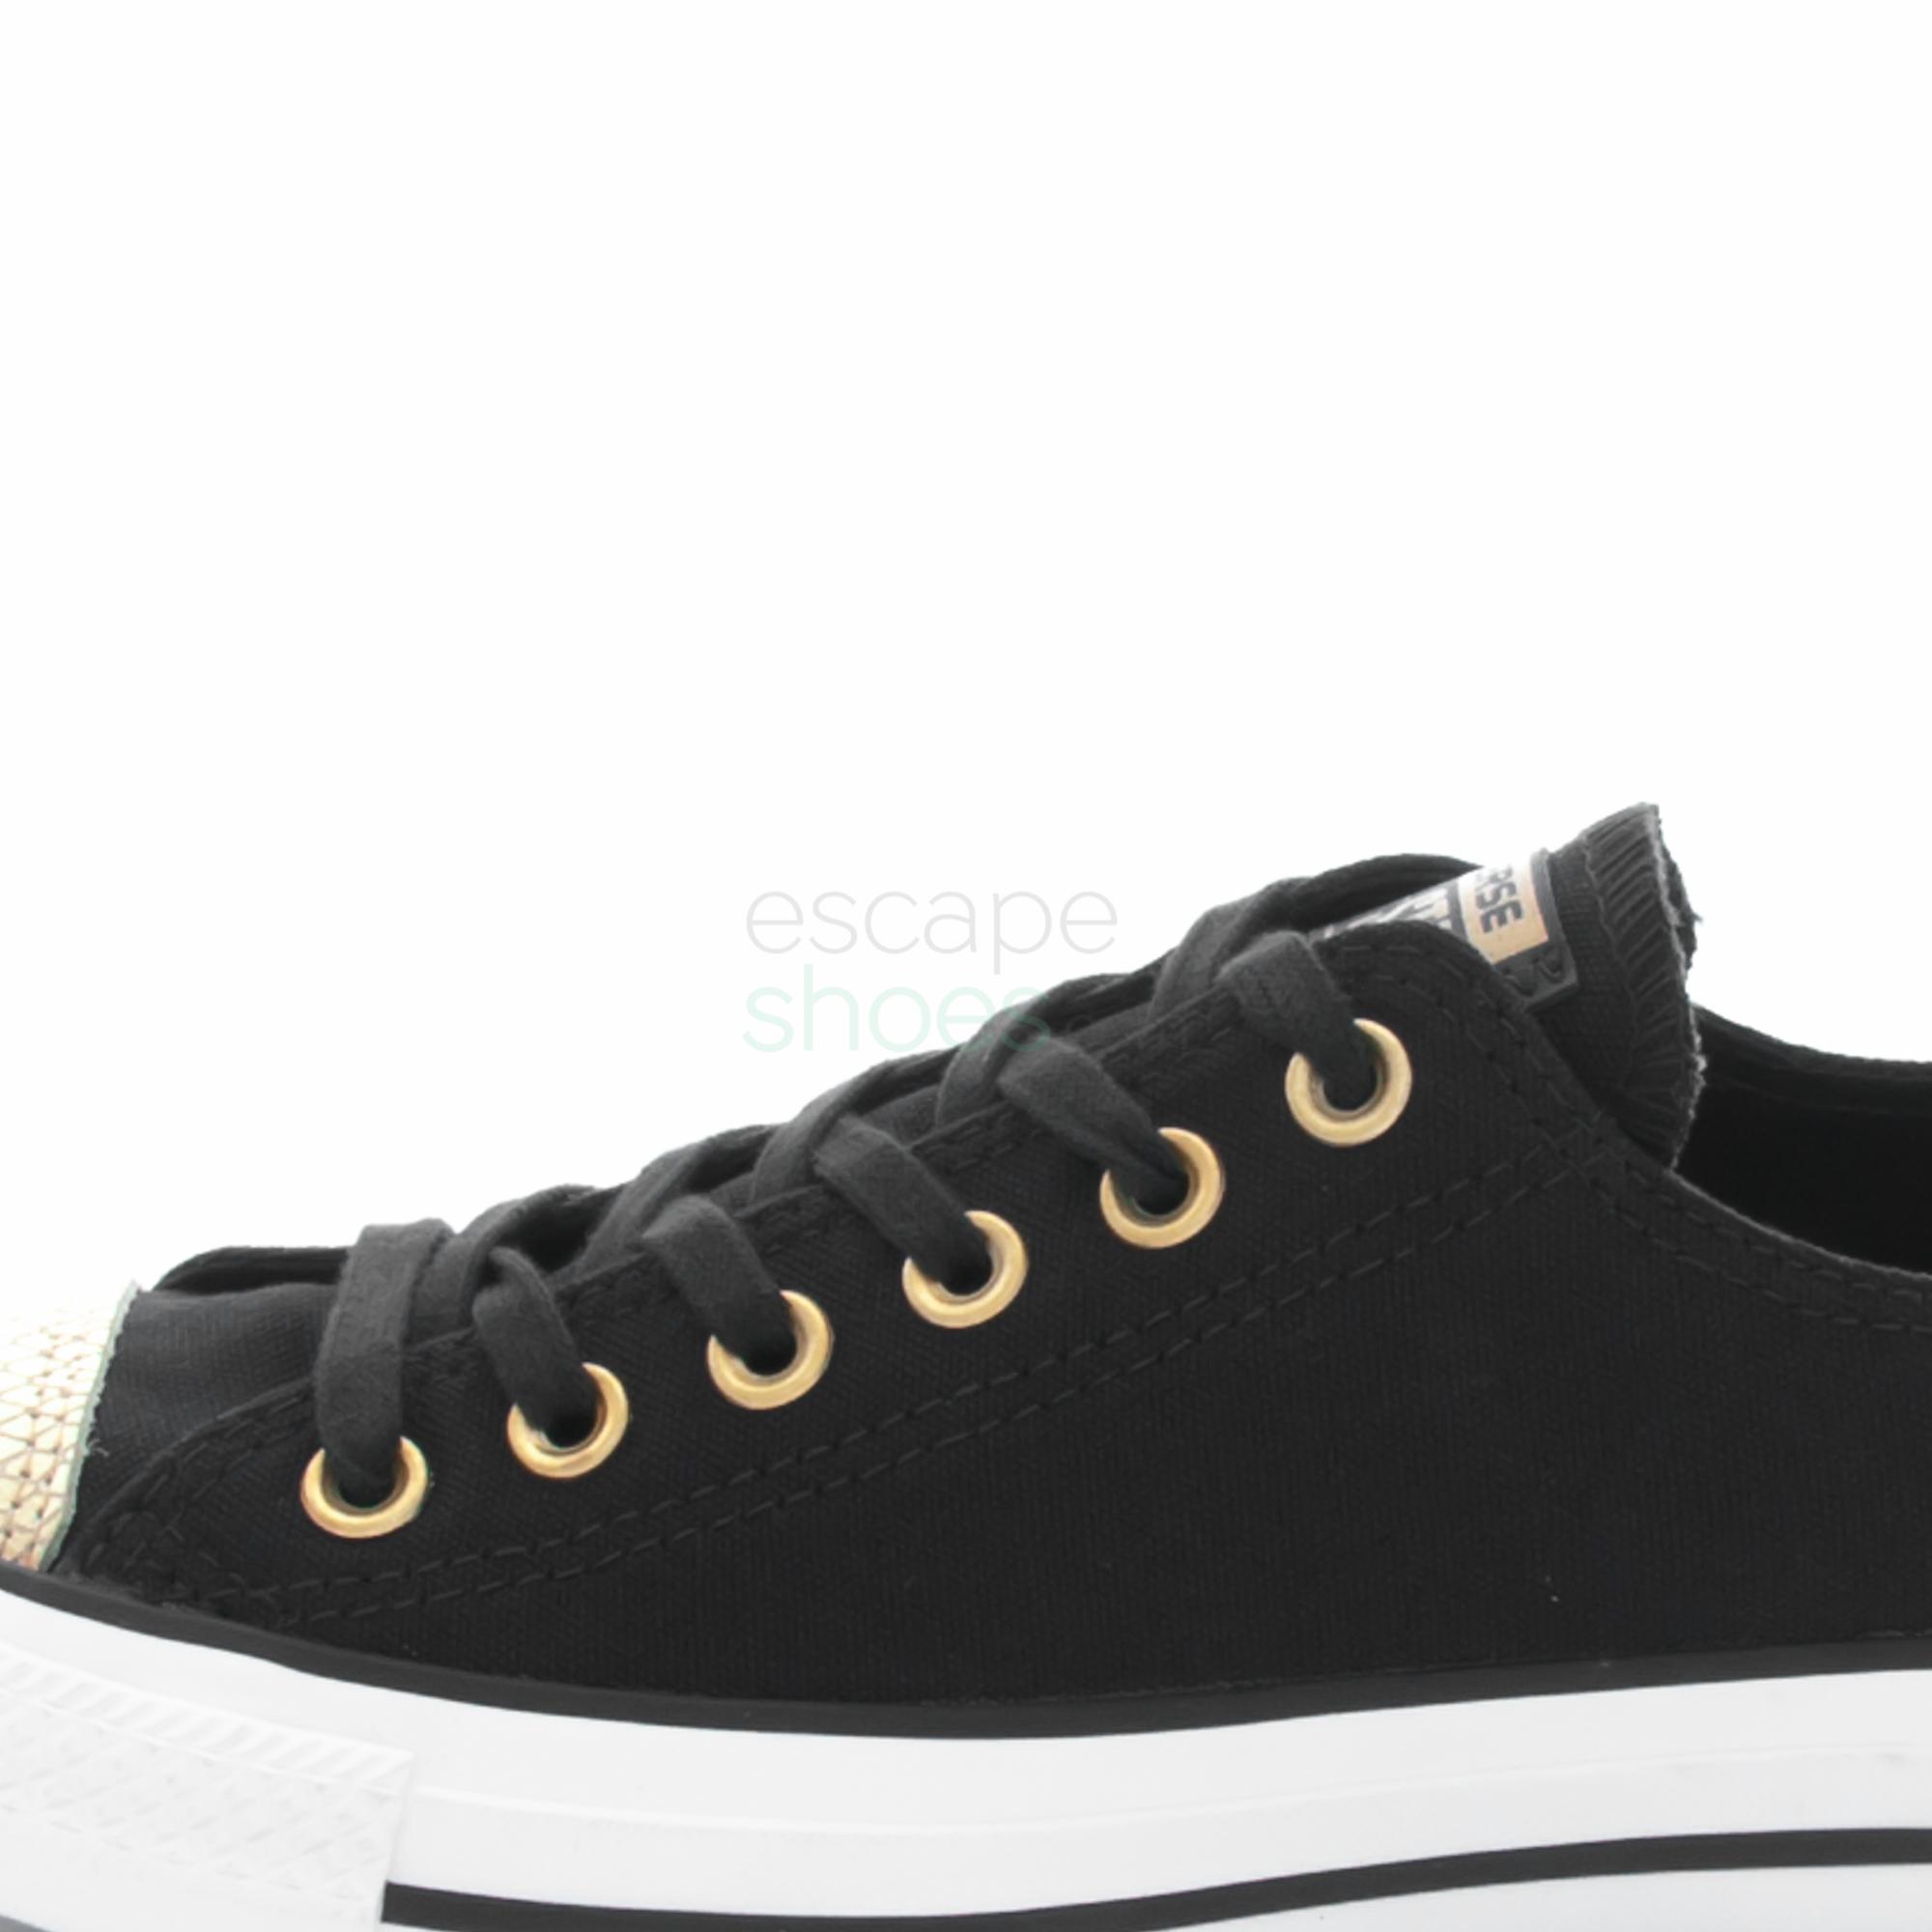 converse black and gold